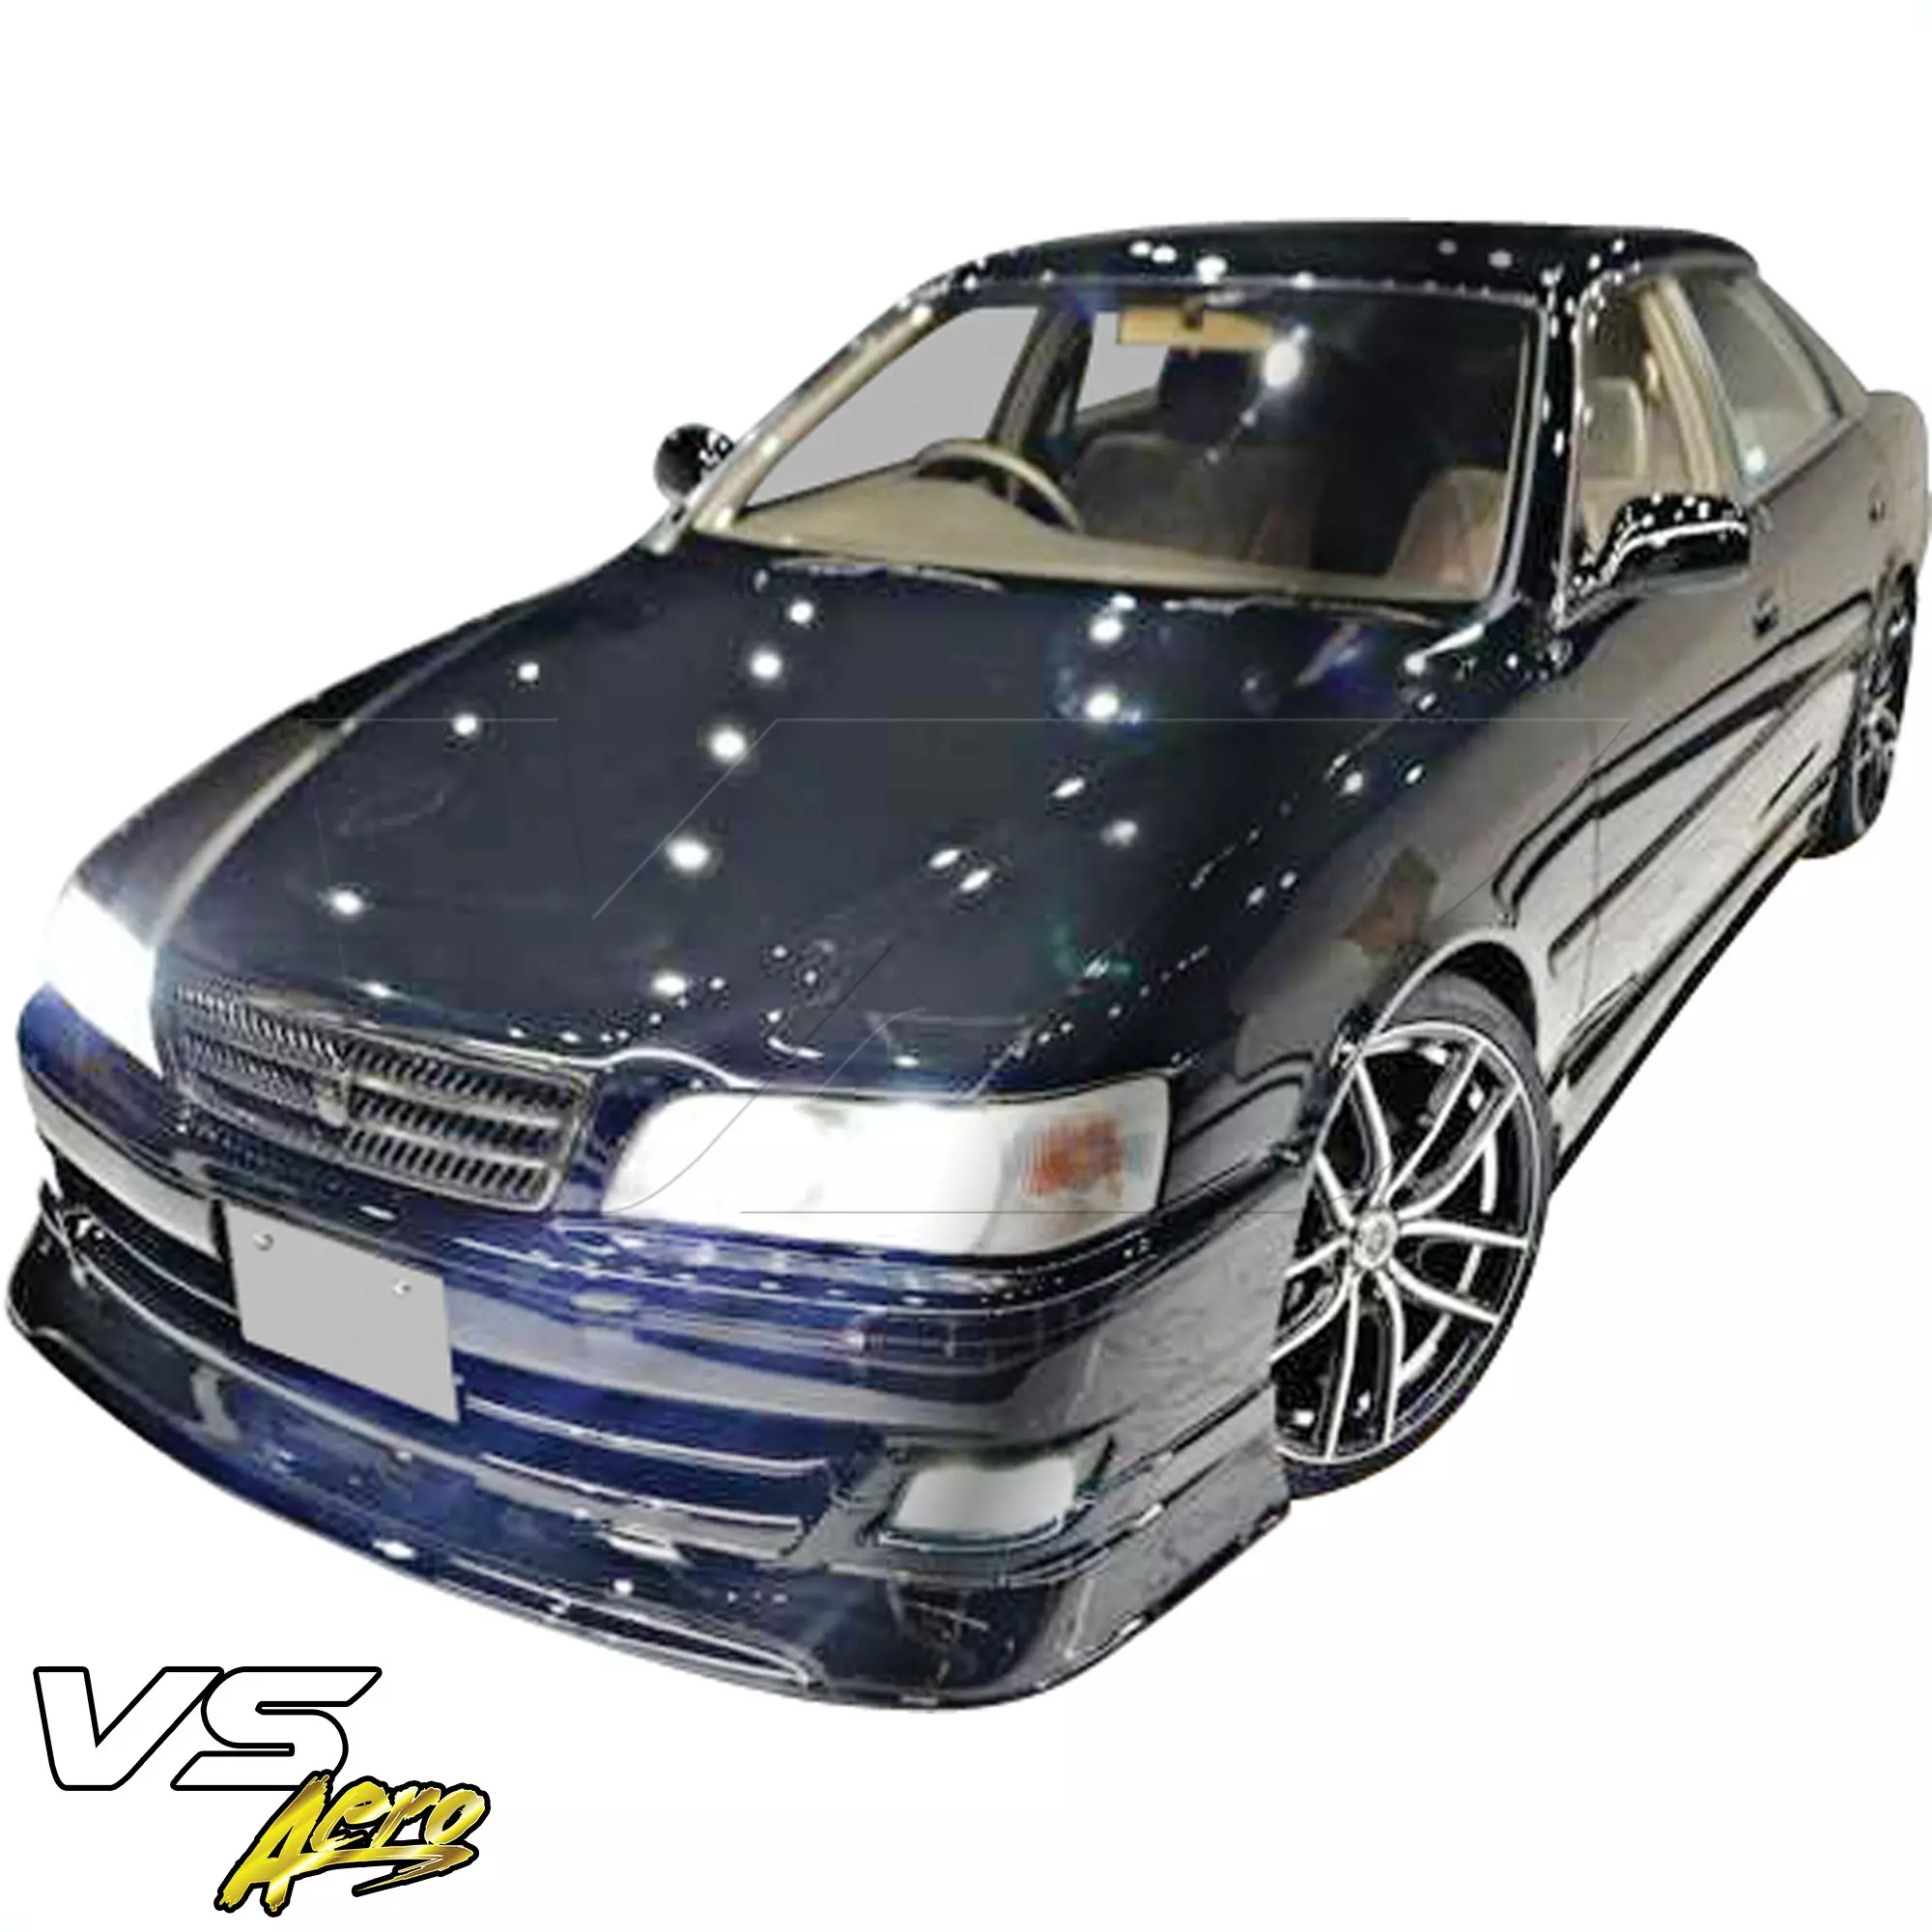 VSaero FRP TRAU Late Front Lip Valance > Toyota Chaser JZX100 1999-2000 - Image 21